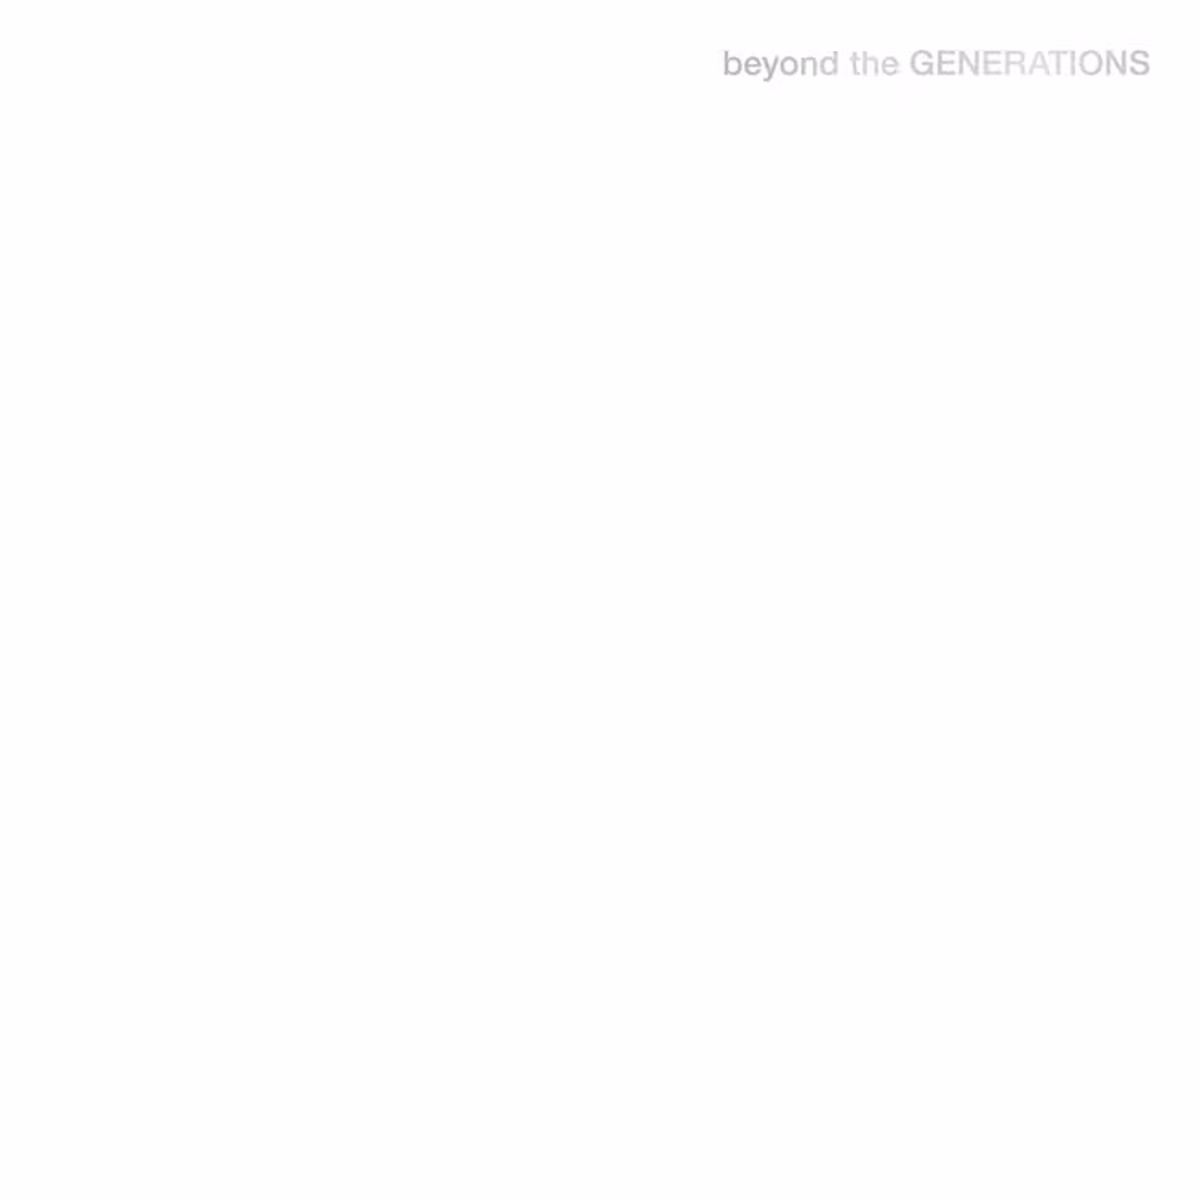 GENERATIONS from EXILE TRIBE - beyond the GENERATIONS